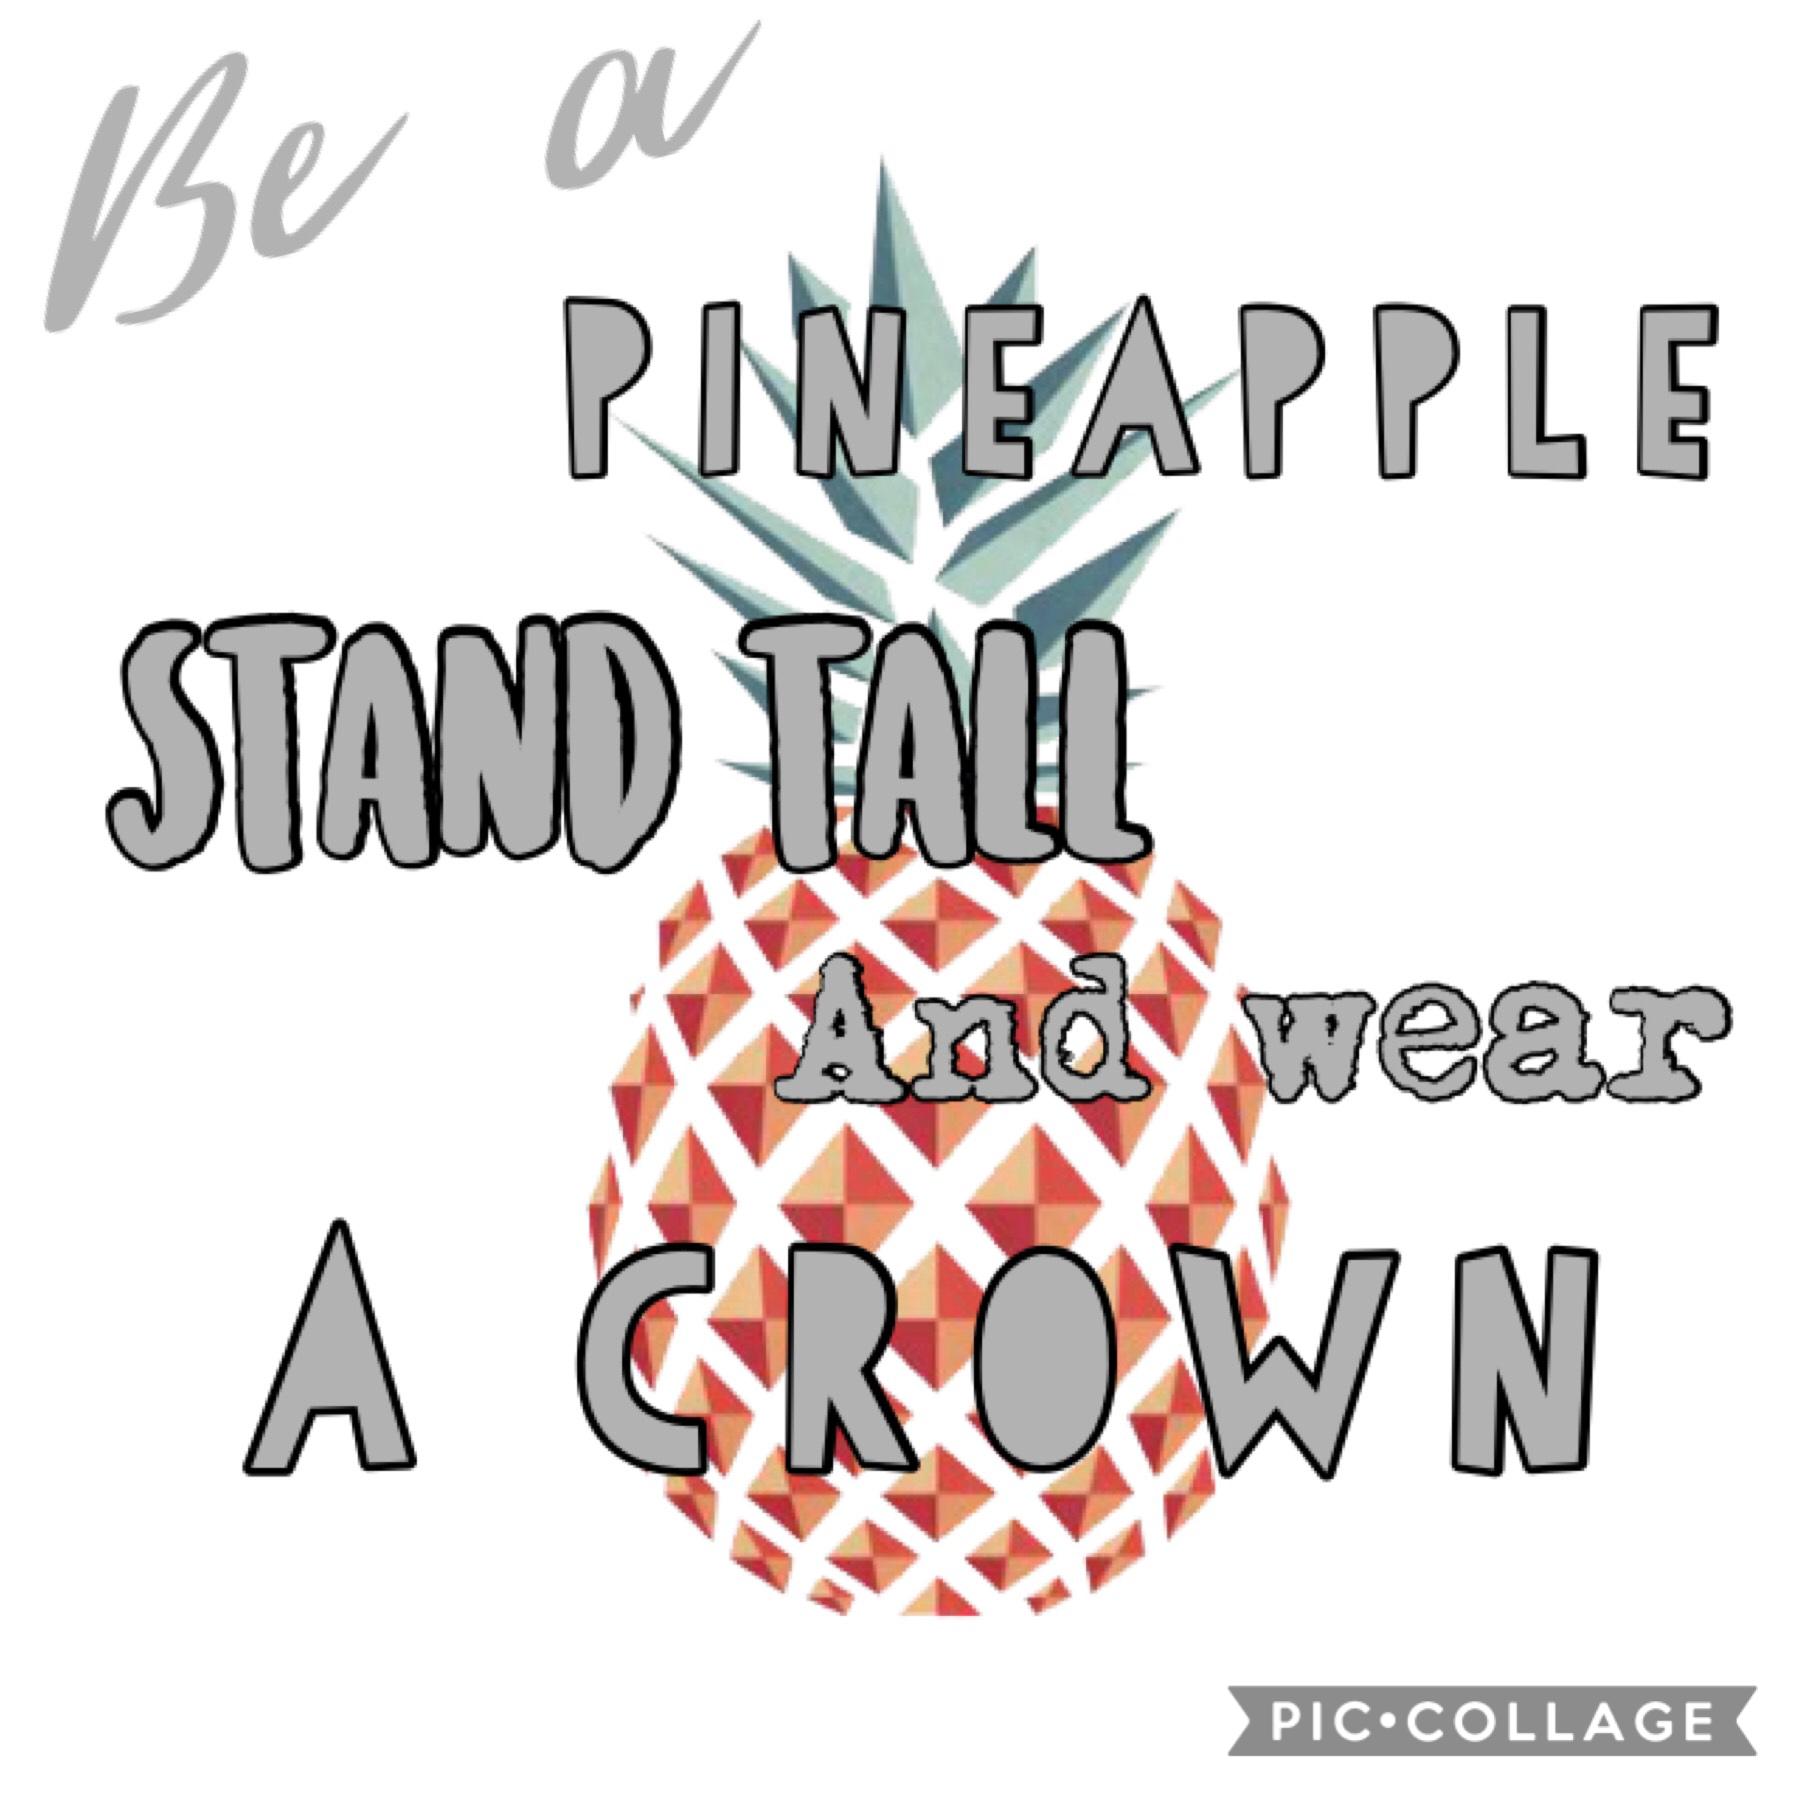 🍍 CLICK! 🍍 
Be a pineapple! Stand tall! Be sweet! Don’t let anything get in the way of what you love. Bye UN1QUElets! 💖